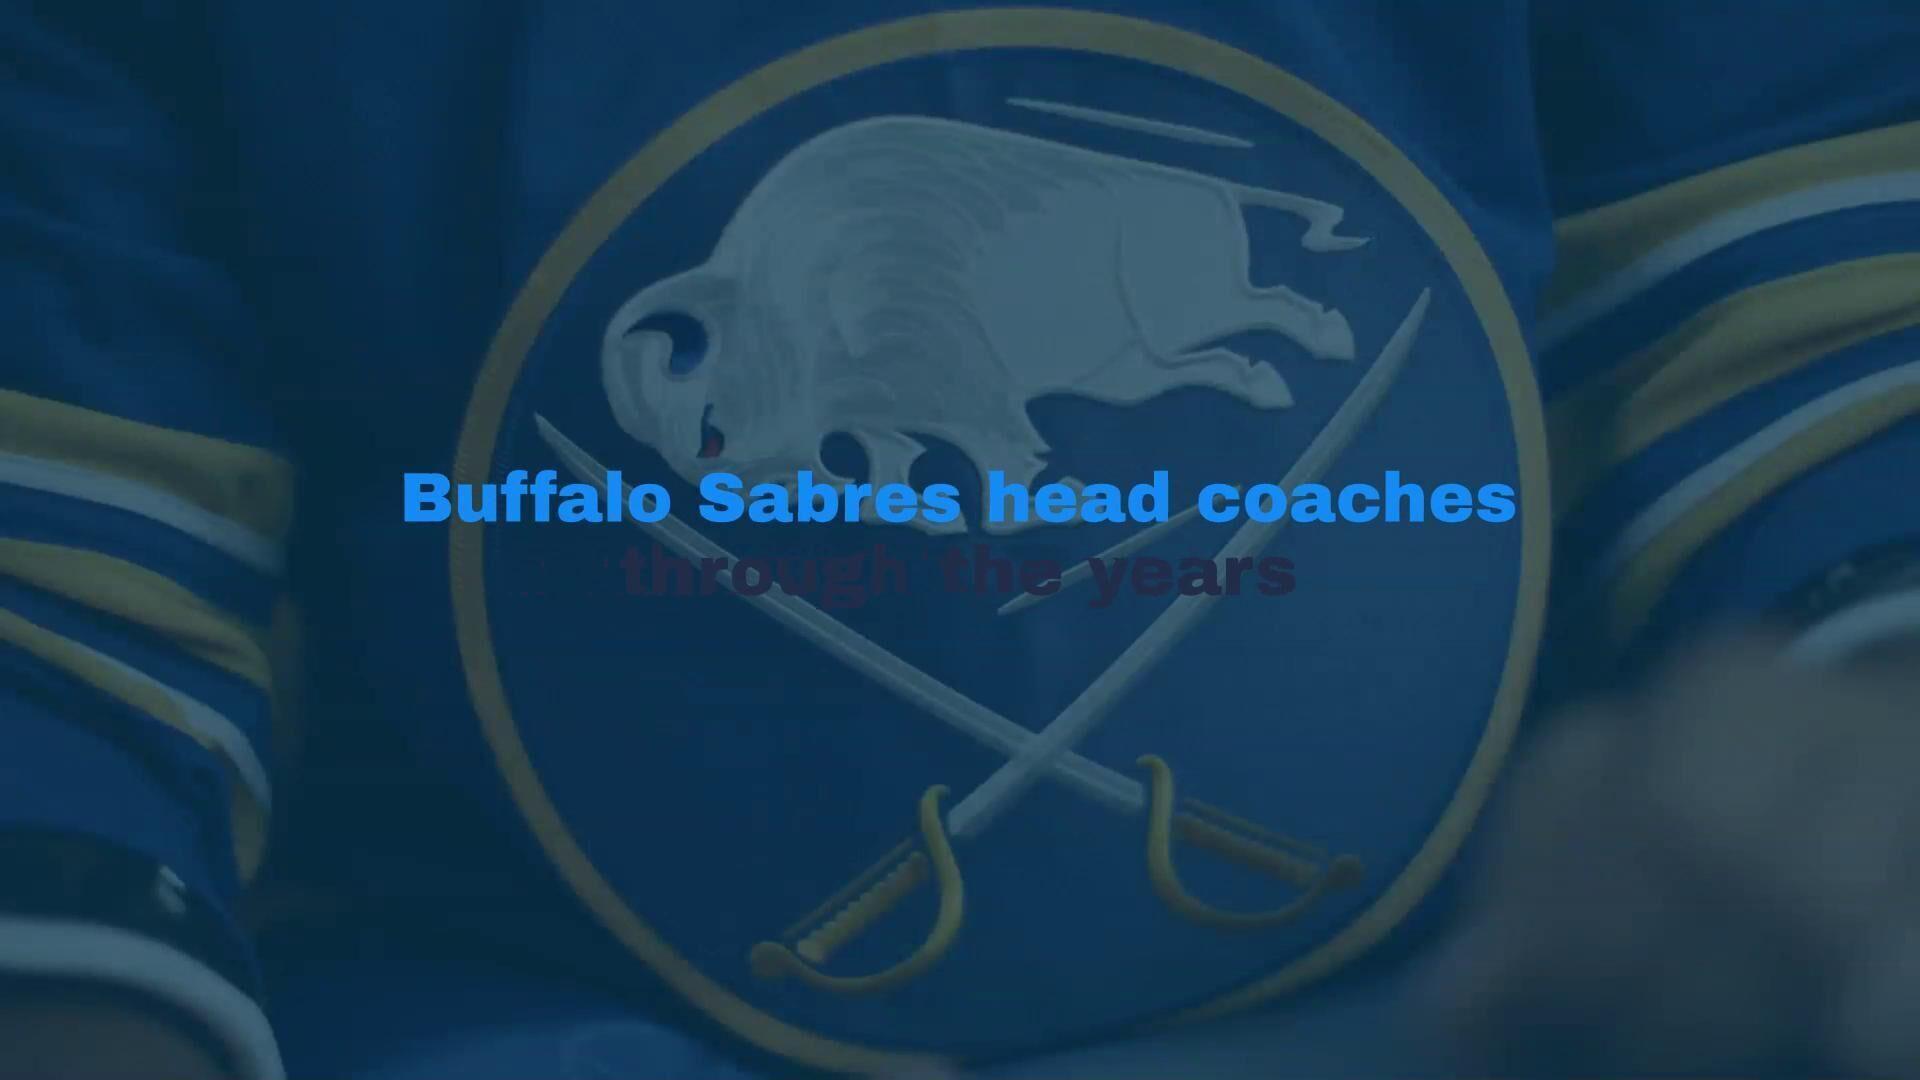 Buffalo Sabres attendance thousands less than pre-COVID numbers